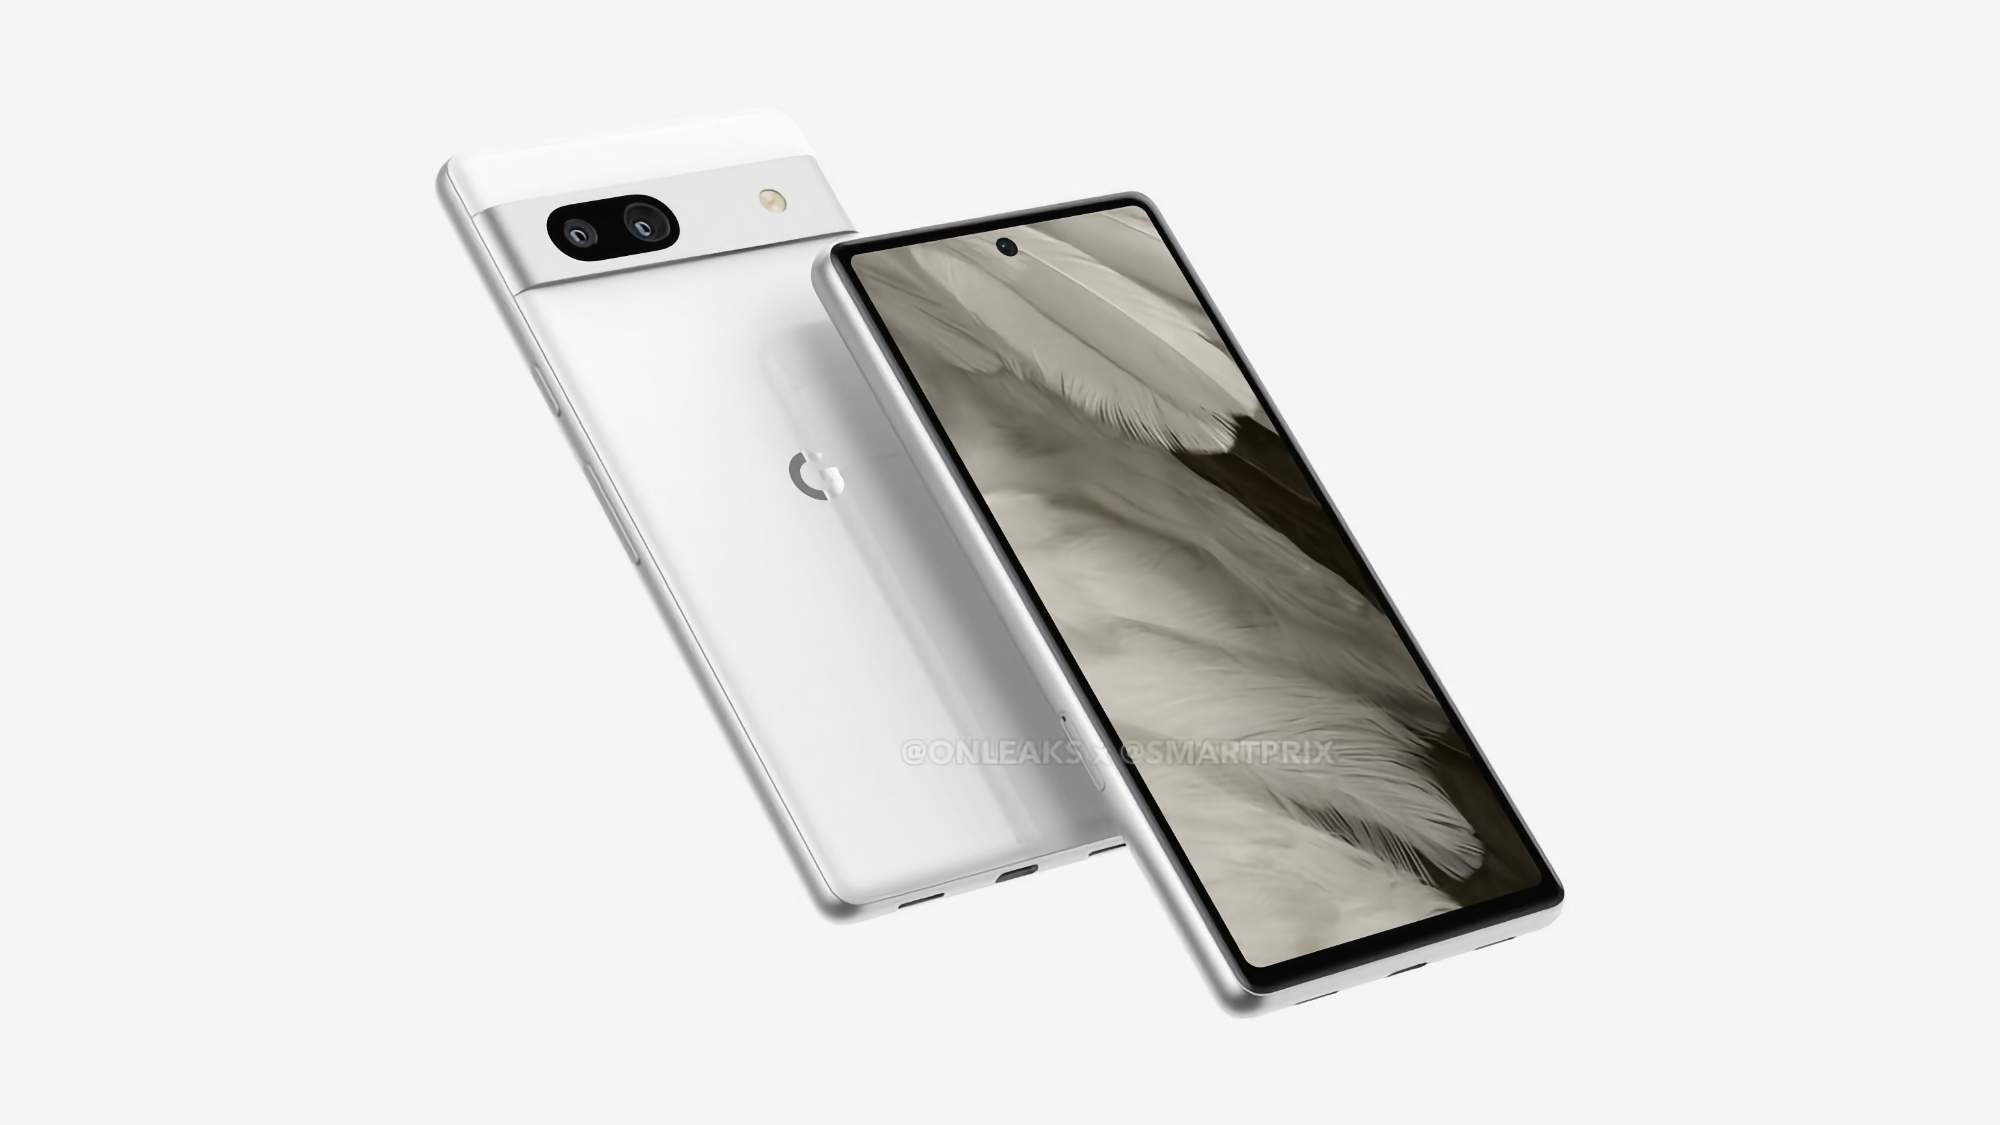 Insider: Pixel 7a will get a battery like Pixel 6a but with 20W fast charging and 5W wireless